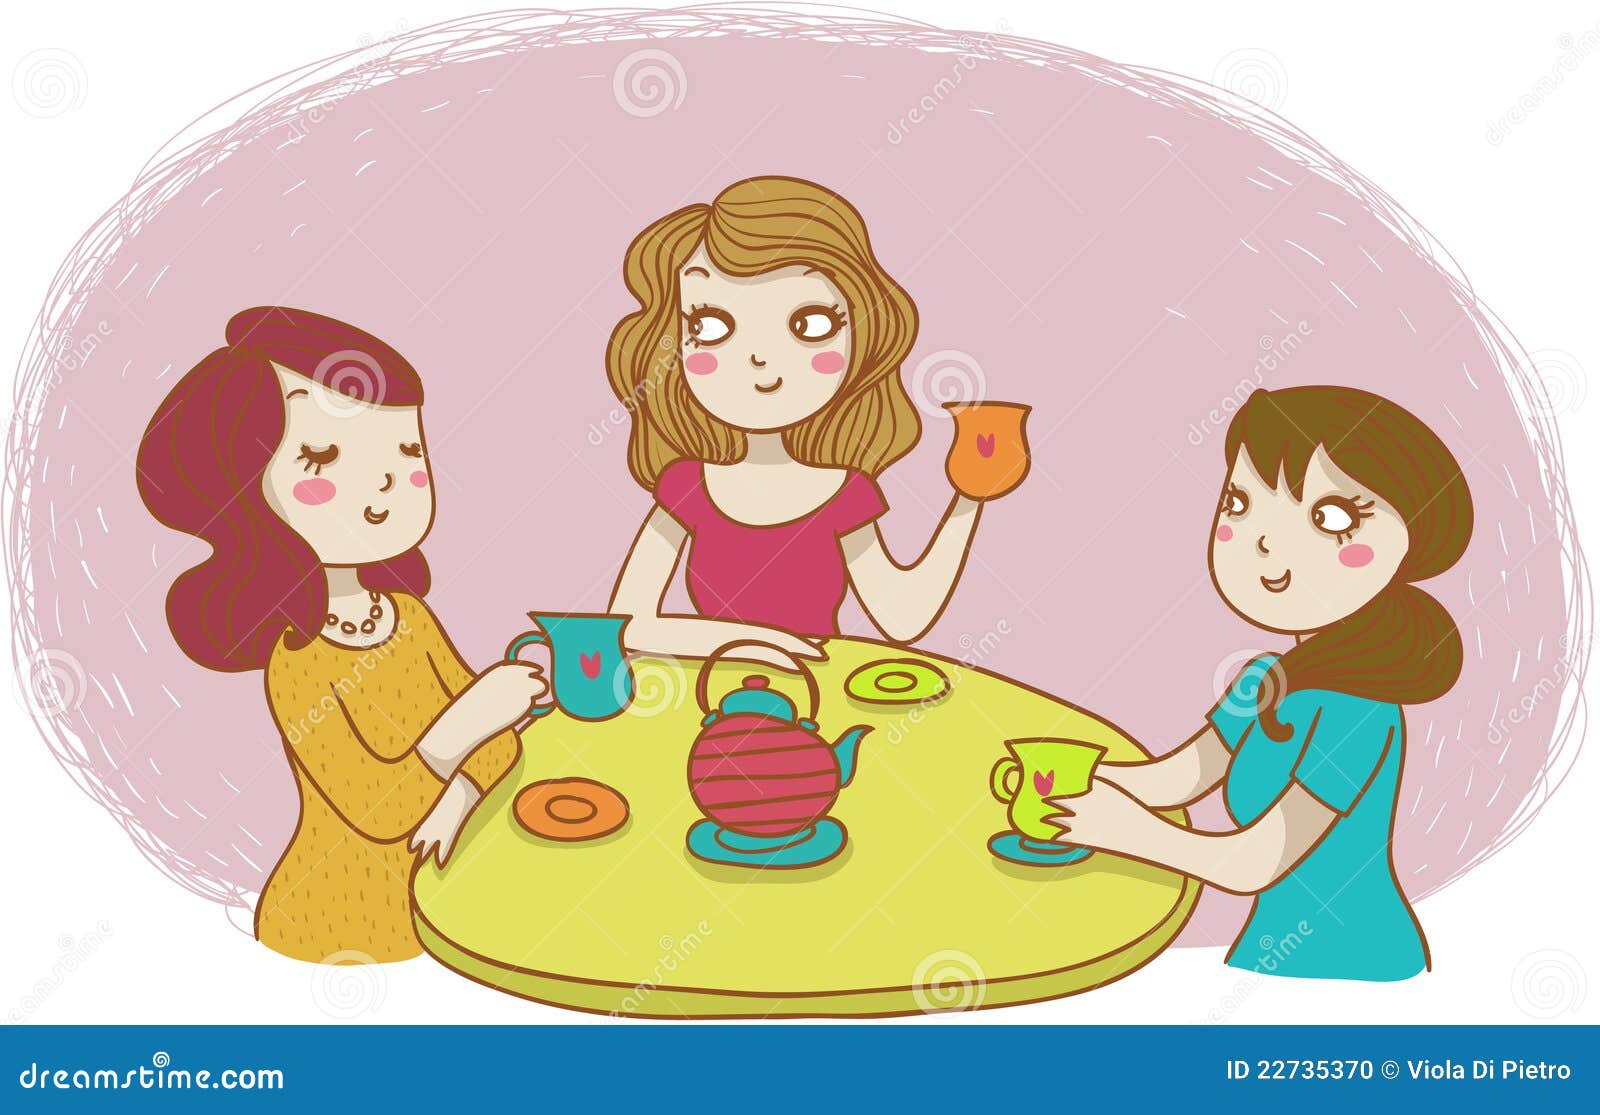 clipart of lady drinking coffee - photo #27